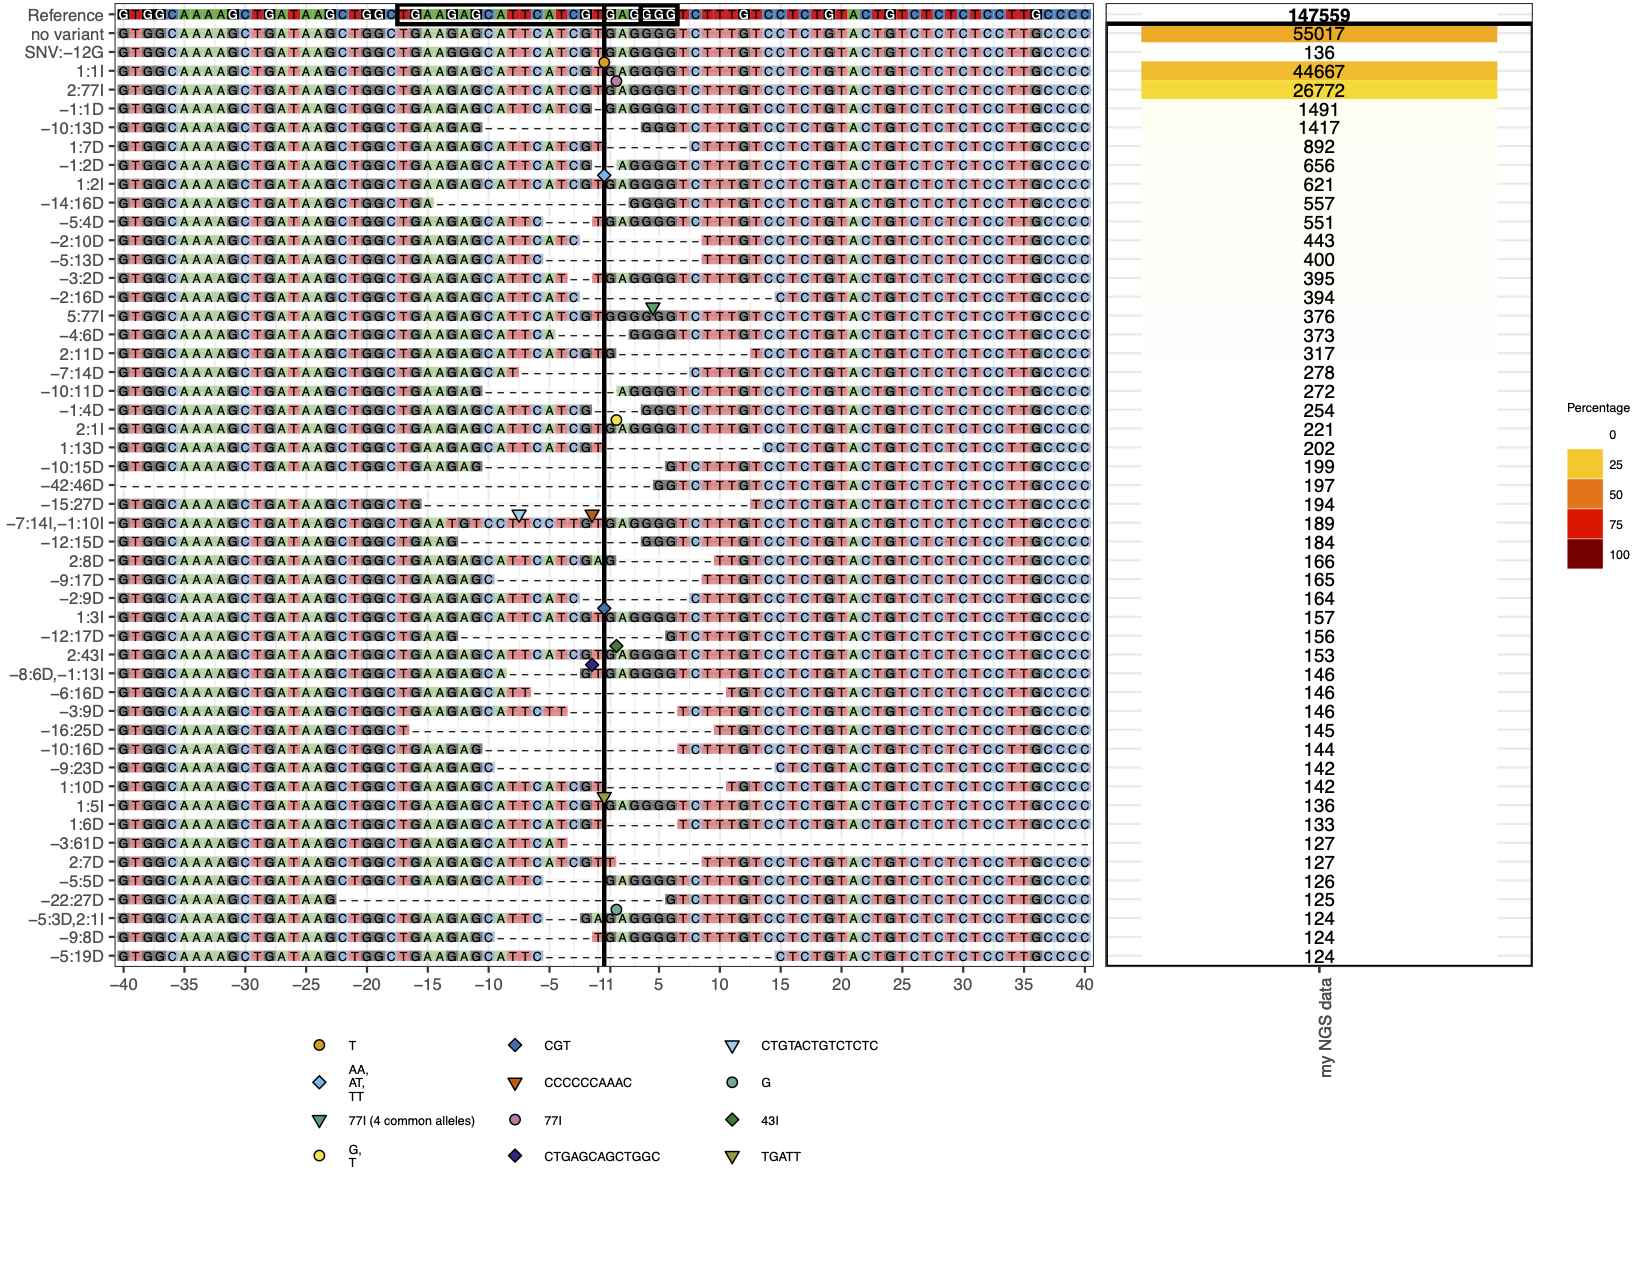 amplicon sequence data in CrispRVariants